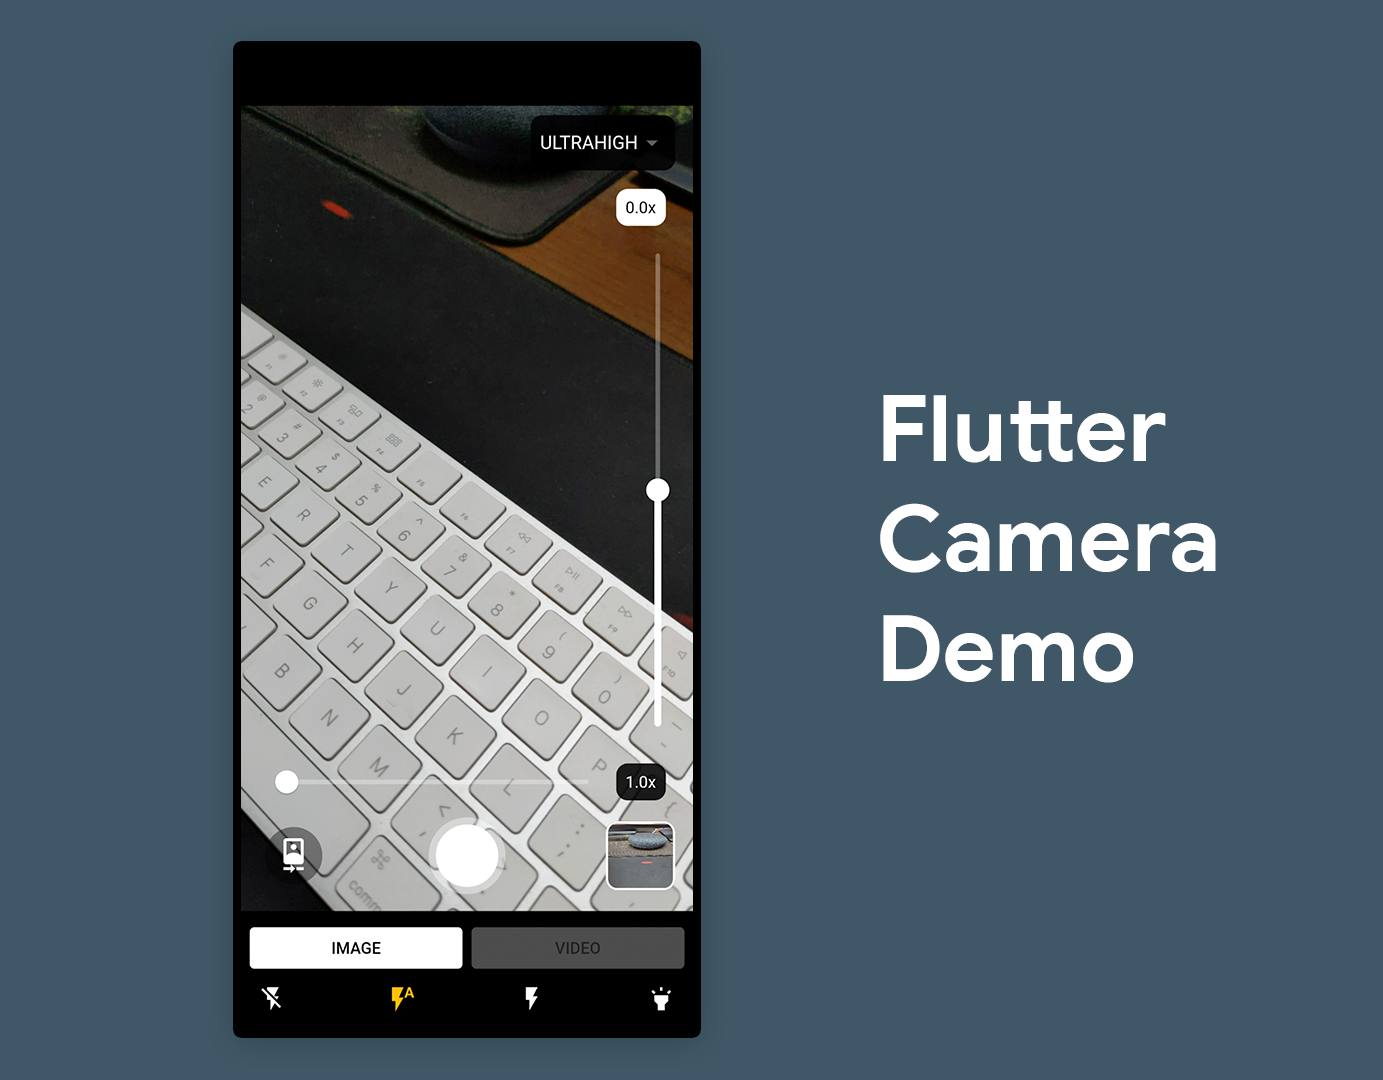 A full-fledged camera app built with Flutter using the camera package